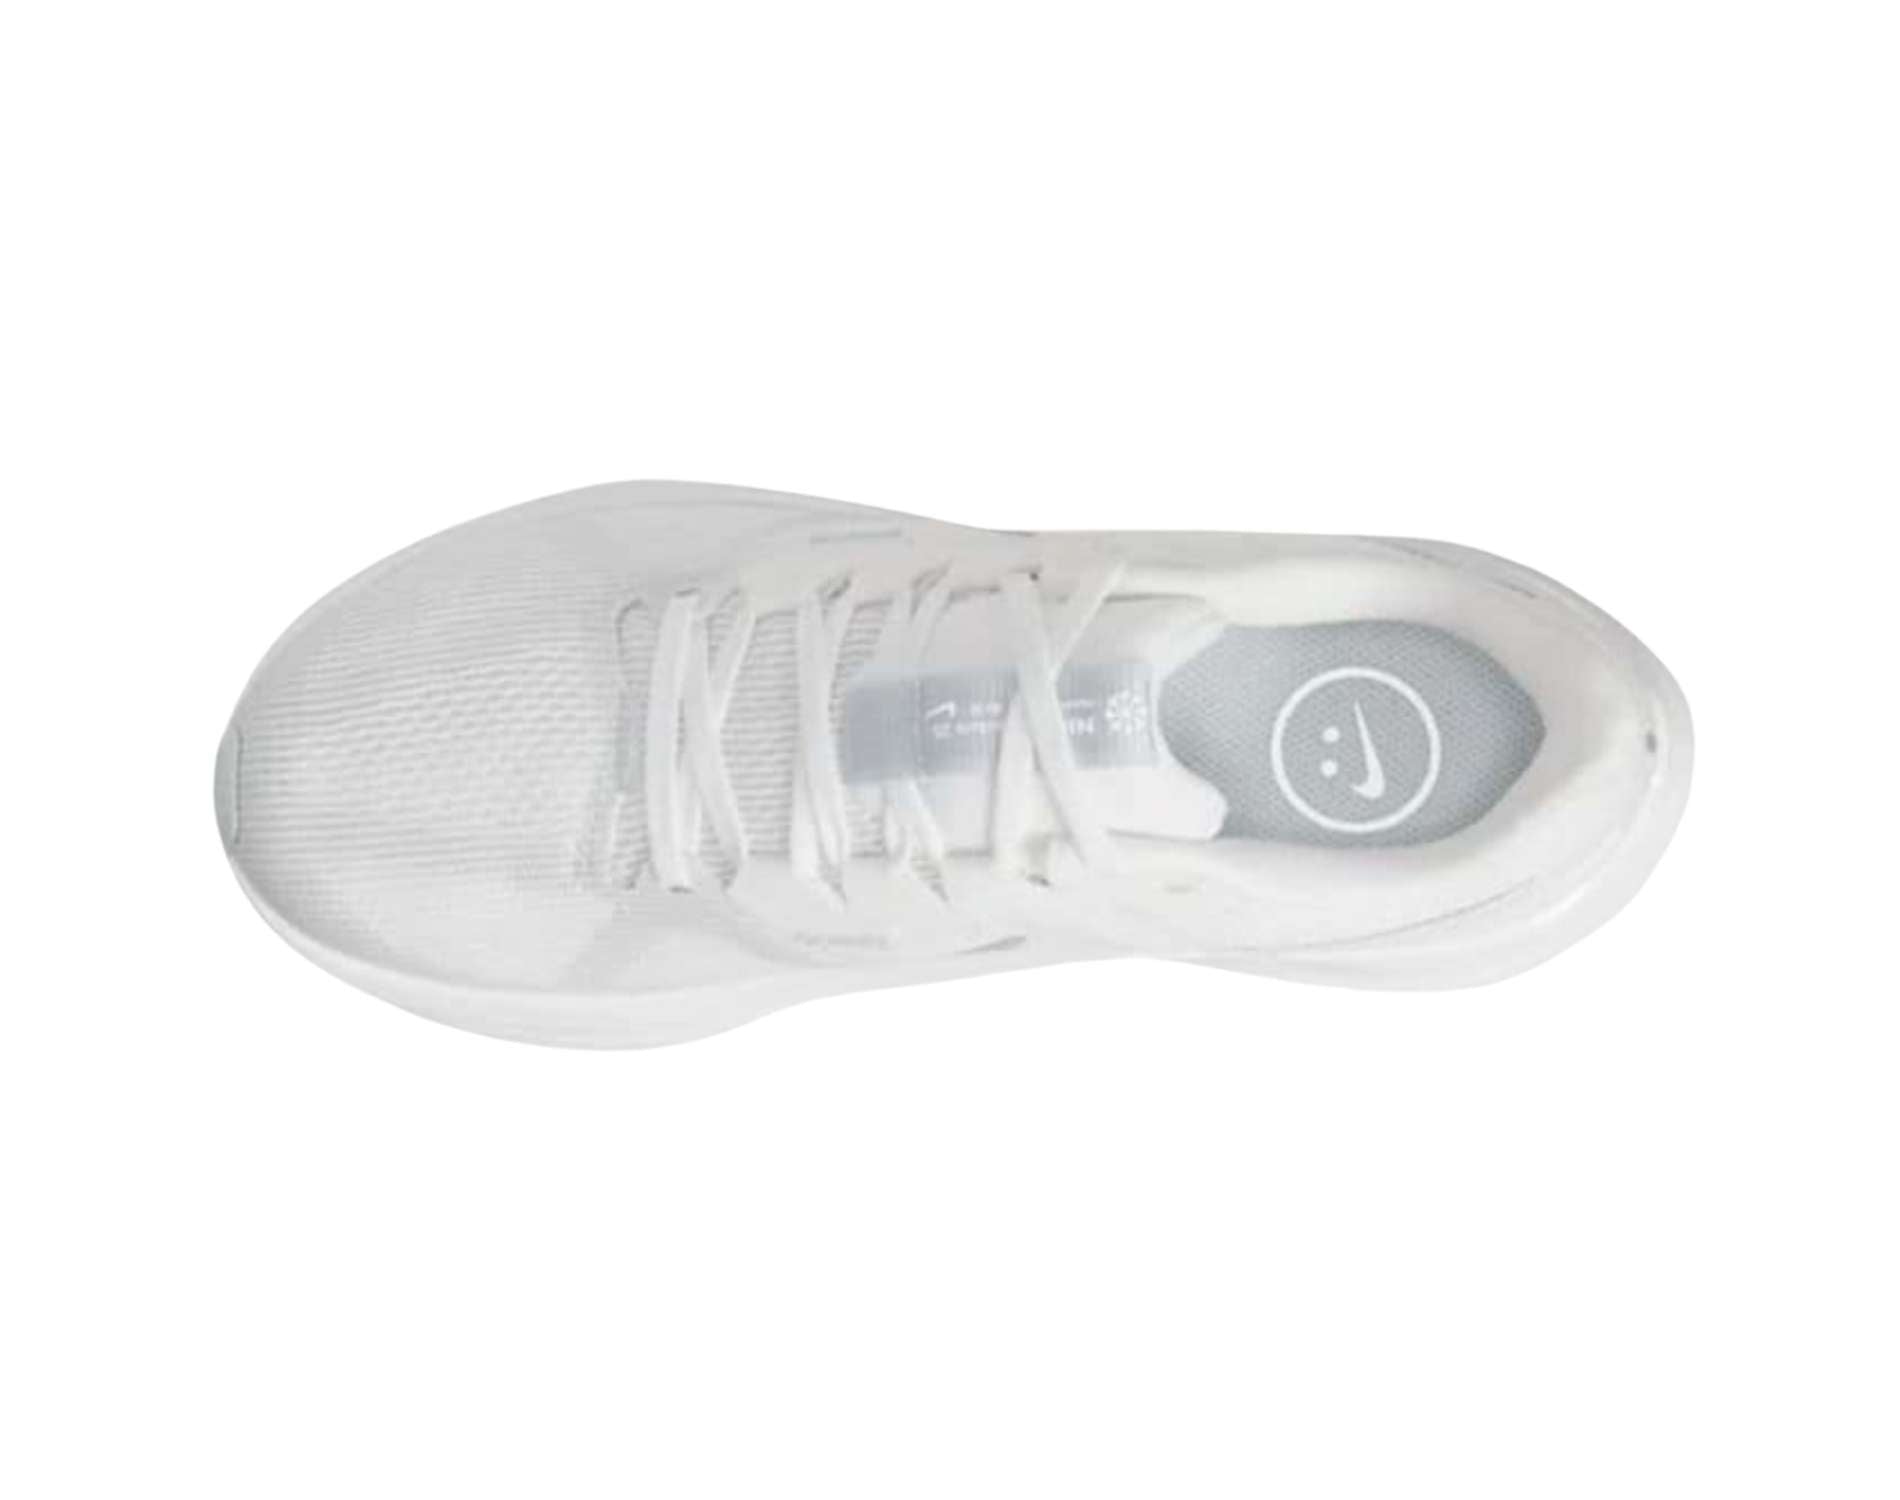 Nikes Zoom Structure 25 womens road running shoes in white pure silver platinum colour. 